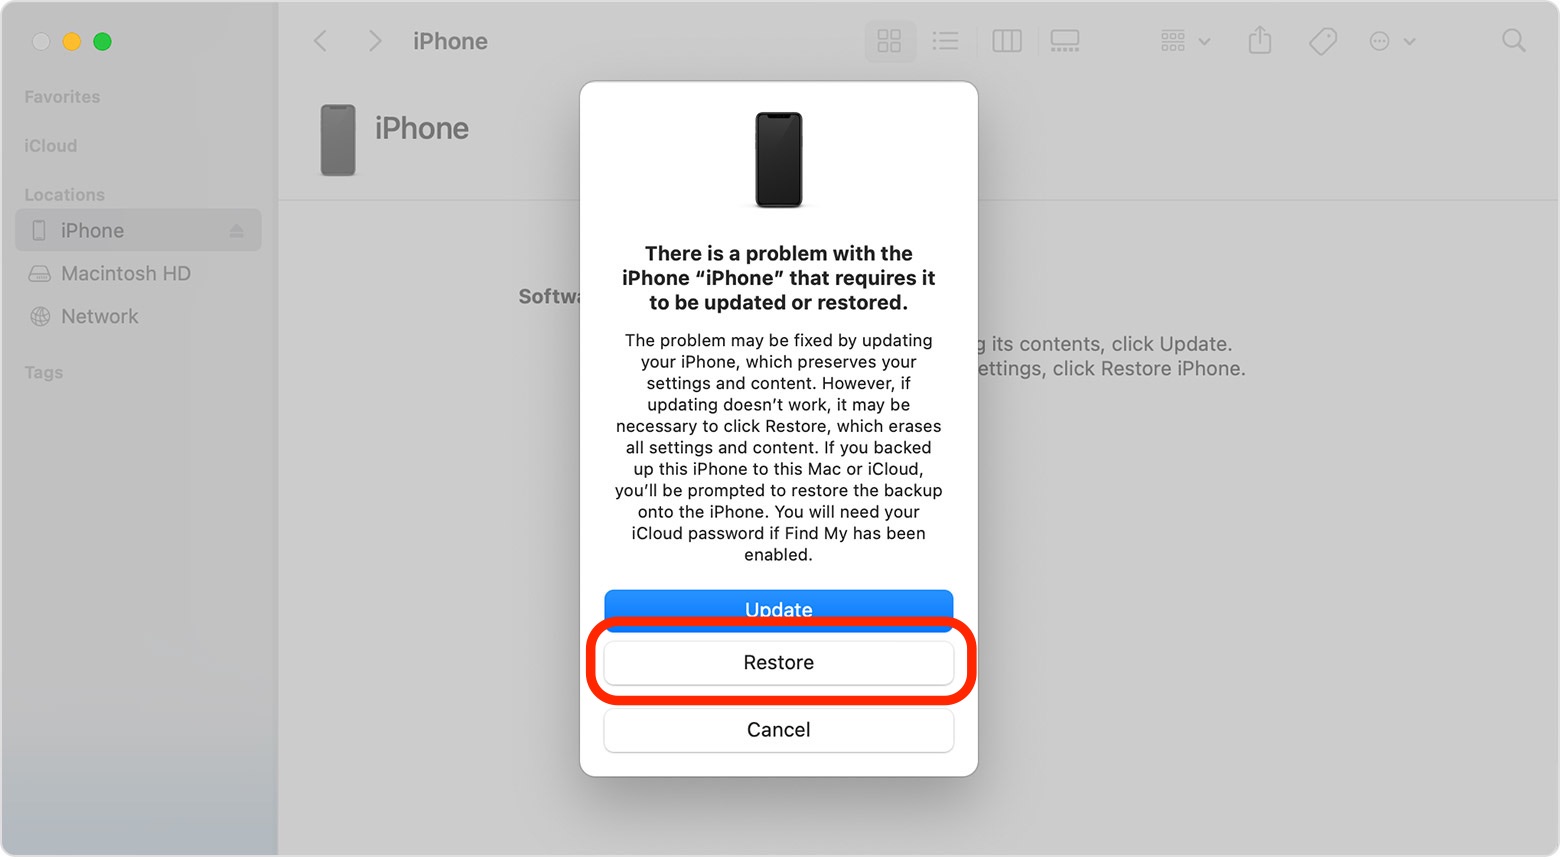 How To Get Into a Locked iPhone Without The Password Using iTunes